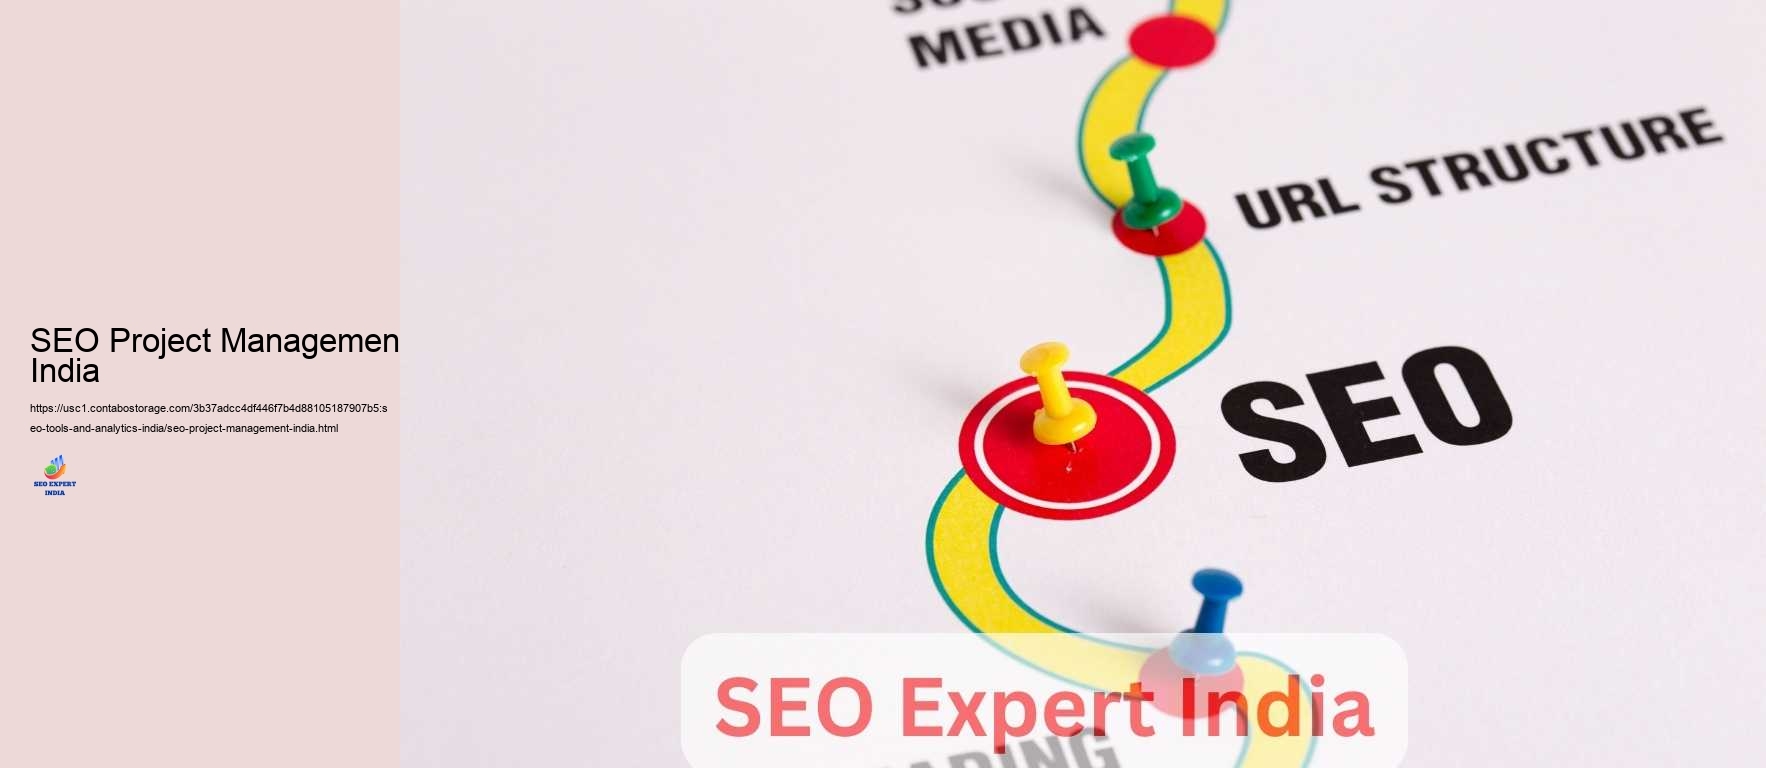 SEO Project Management India